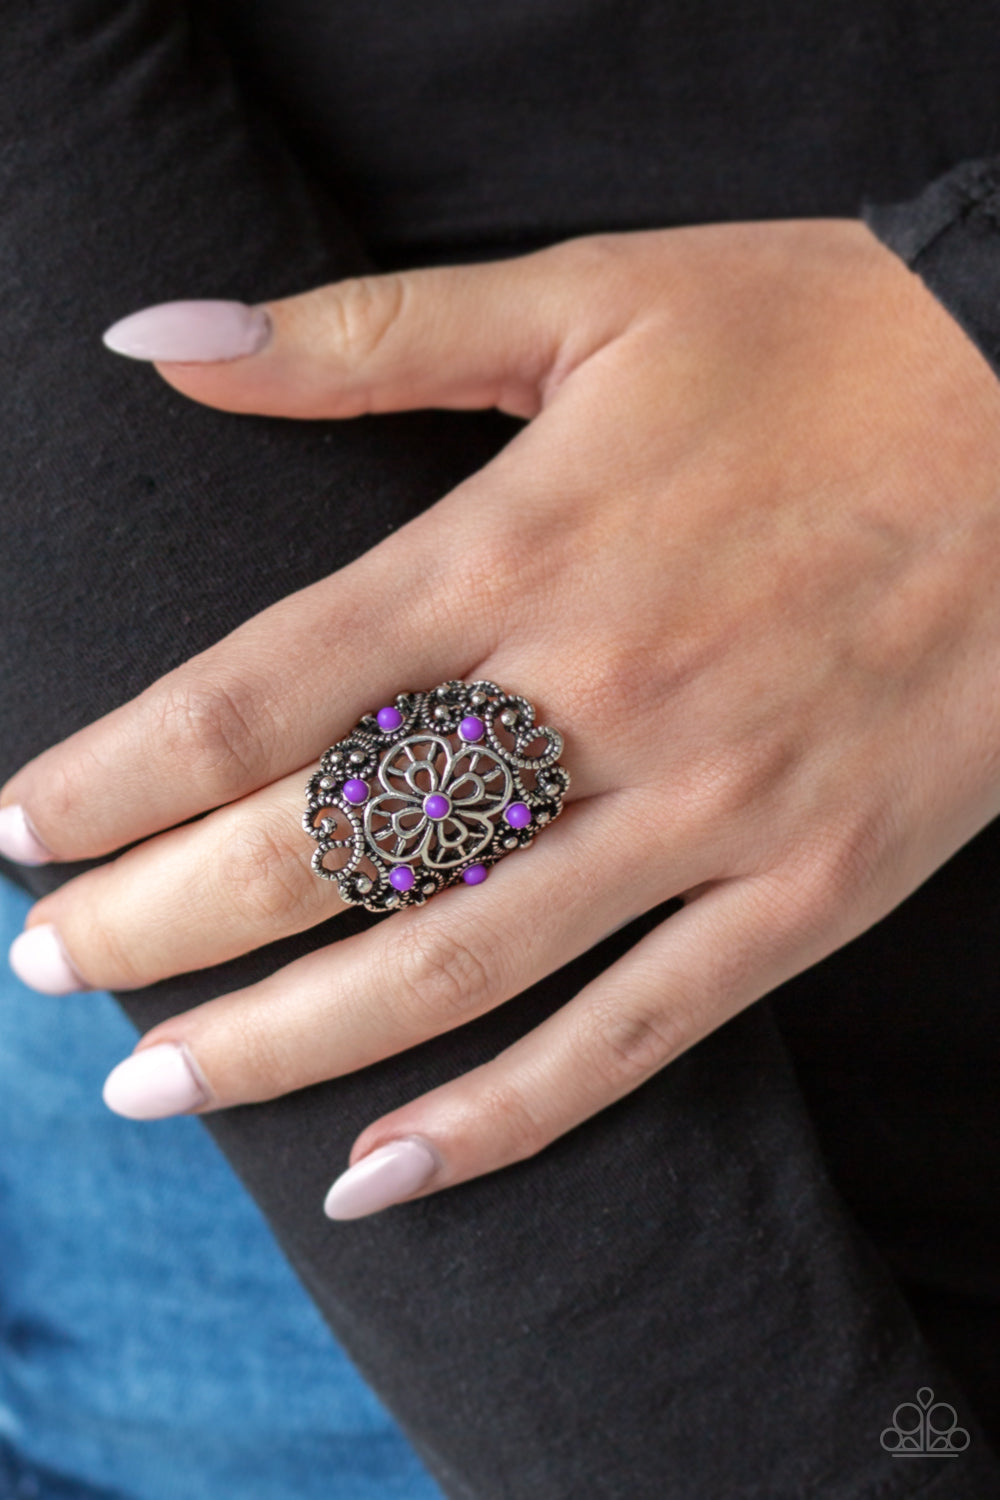 Floral Fancies - Purple - Silver Floral Ring - Paparazzi Accessories - Purple beads are sprinkled across a shimmery frame swirling with silver filigree, creating a whimsical floral frame atop the finger. Features a stretchy band for a flexible fit. Sold as one individual fashion ring.